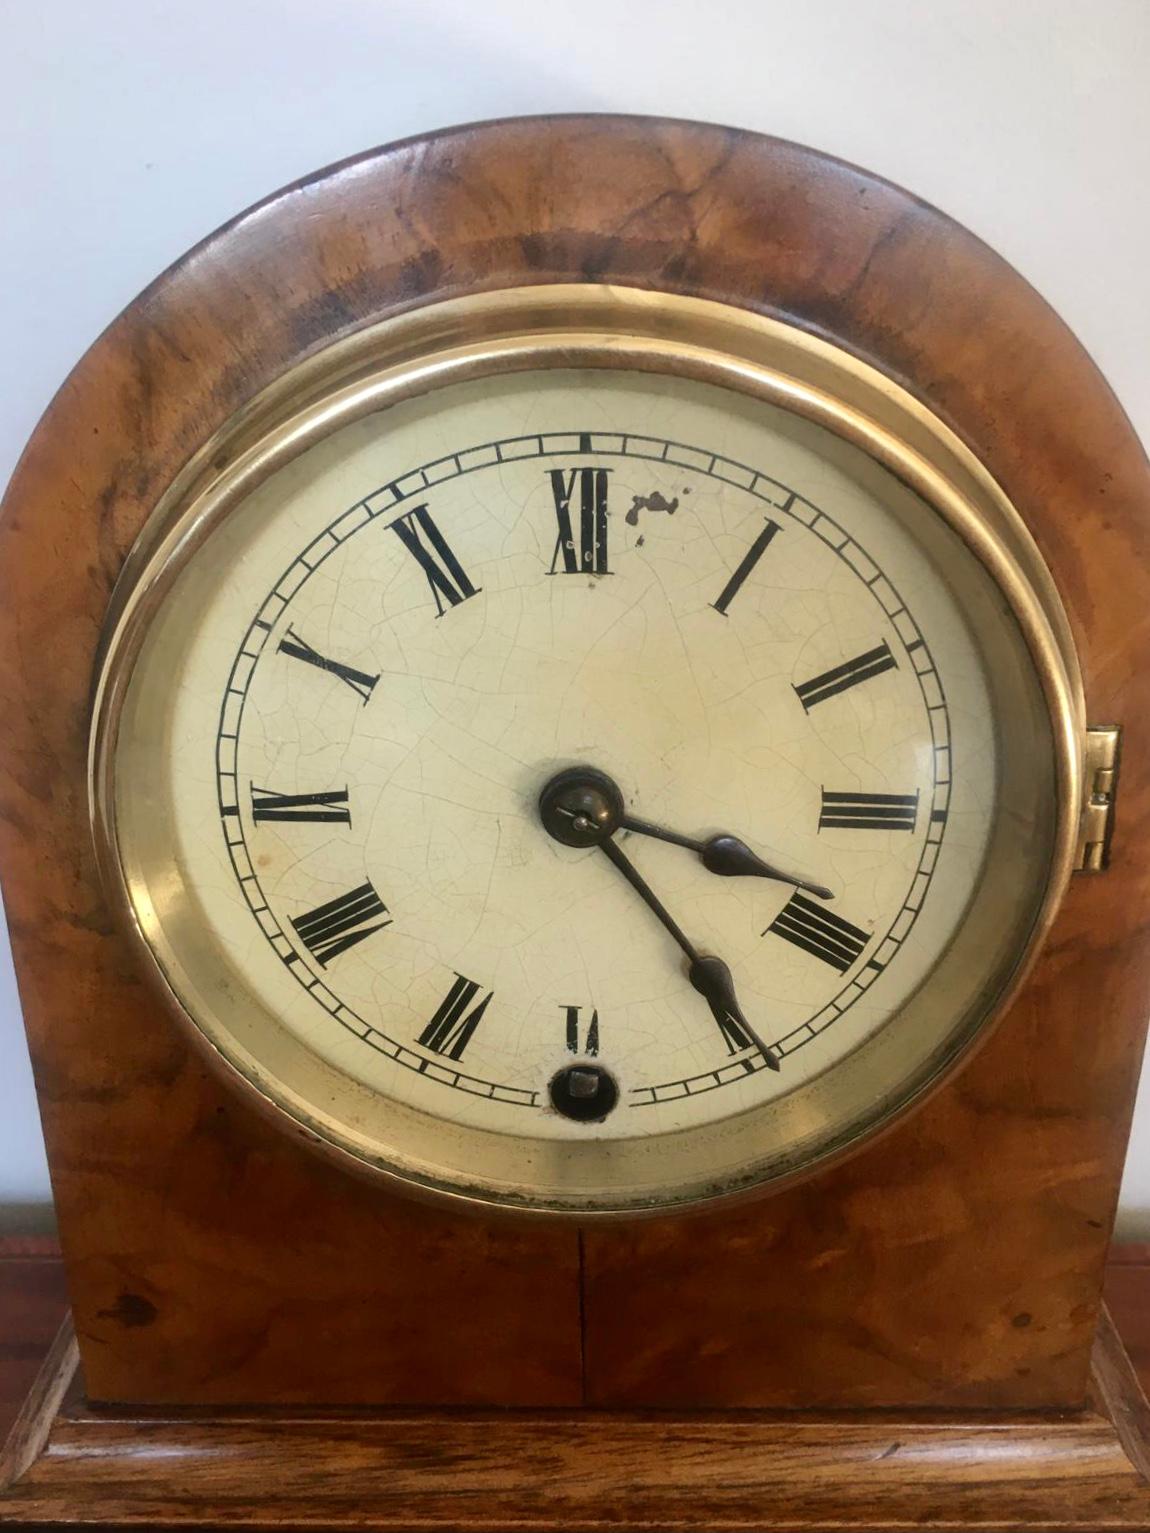 Antique Victorian burr walnut mantel clock having an arched top and burr walnut case standing on original walnut feet. It features a painted circular dial with original hands, brass bezel and opening back door to reveal the timepiece movement with